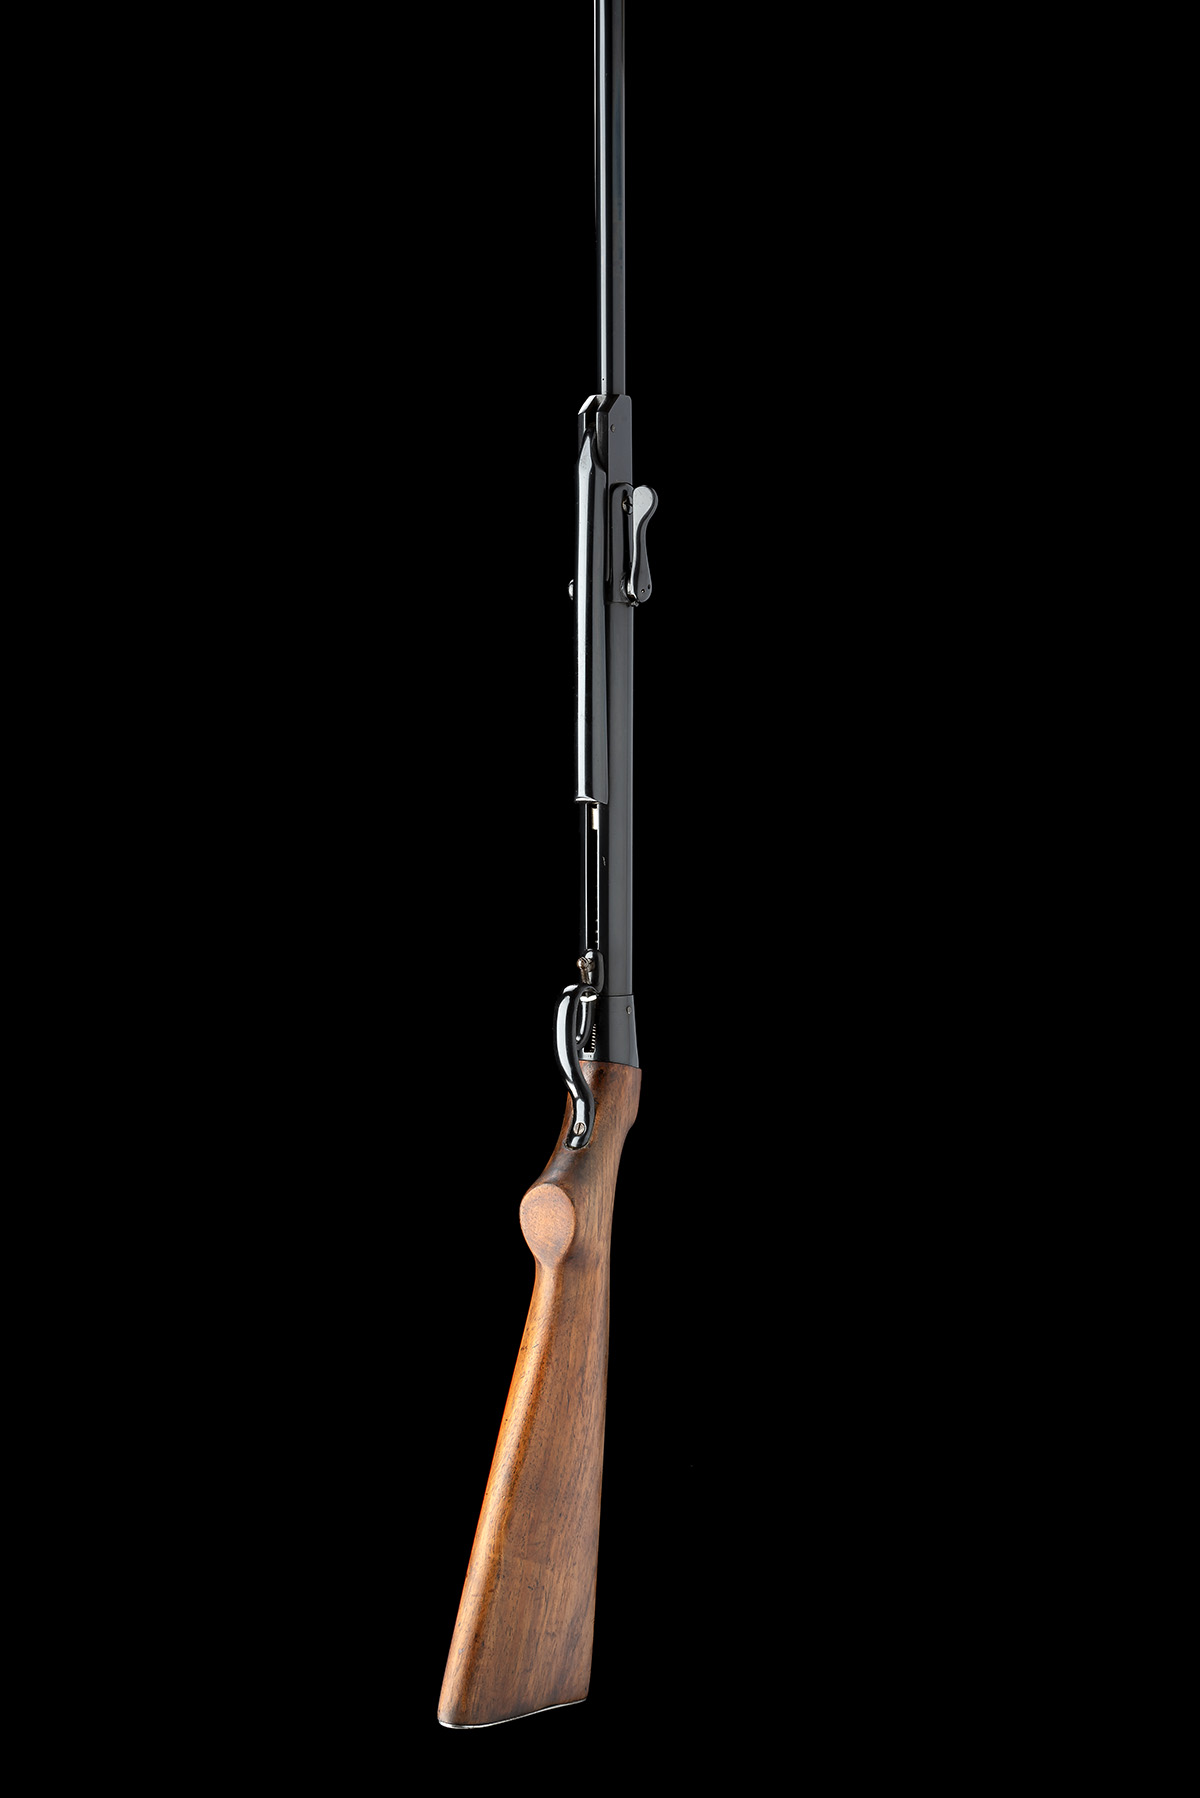 AN UNUSUAL .177 CAM-ACTION BREAK-BARREL GREENER VARIANT AIR-RIFLE, UNSIGNED, no visible serial - Image 8 of 9